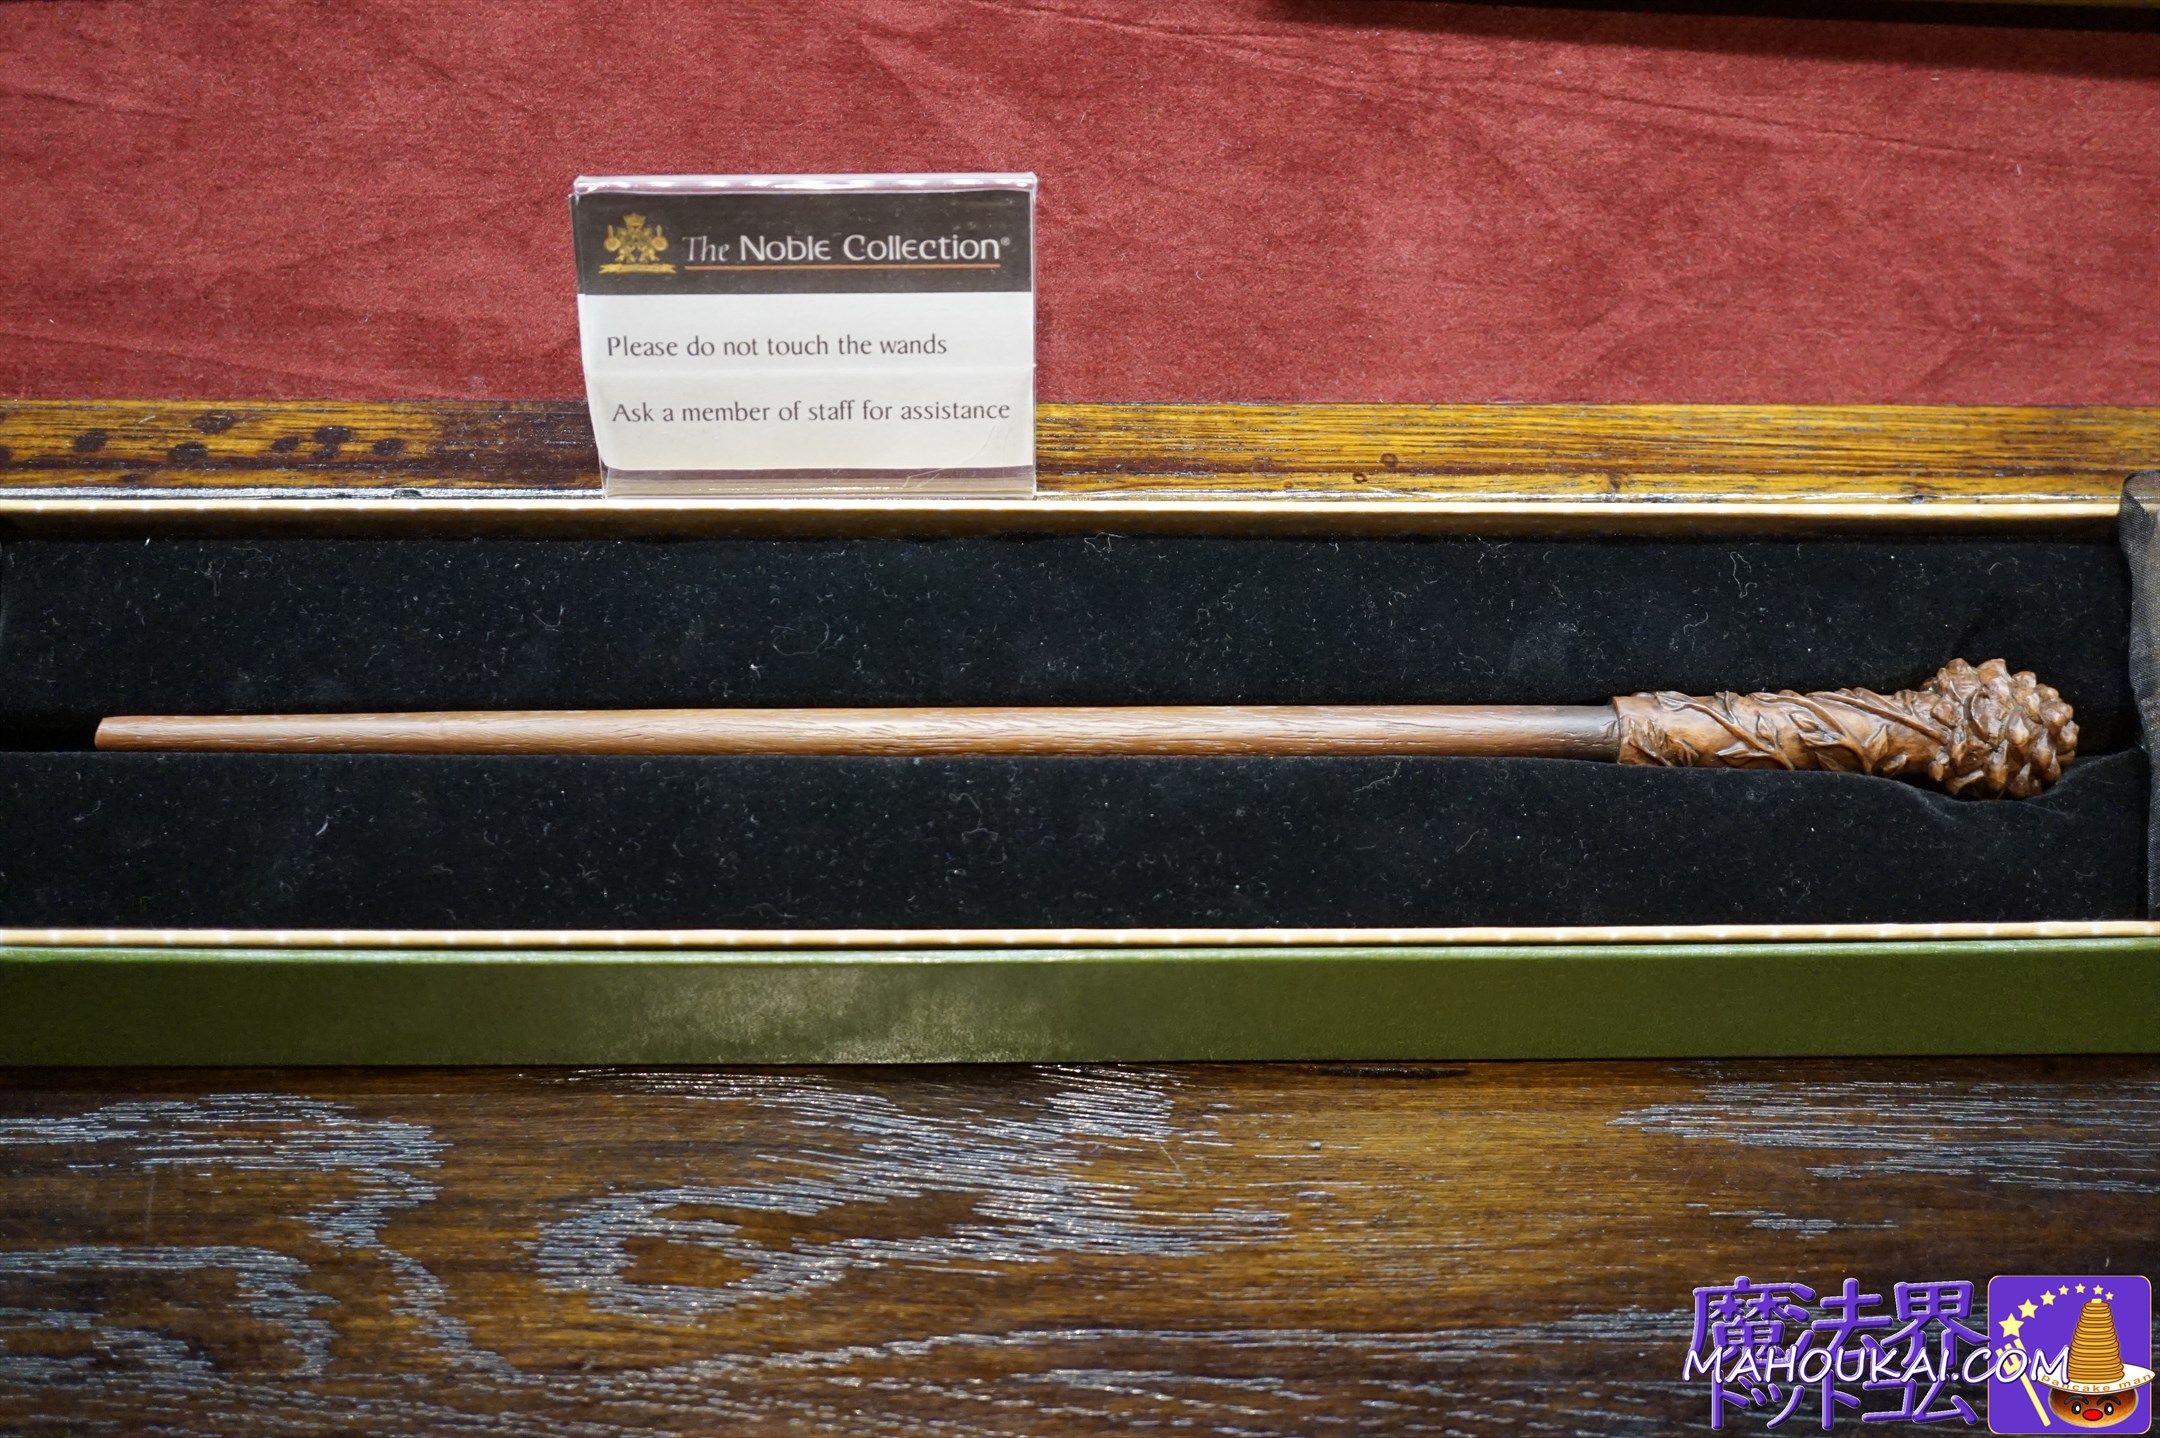 Banty wand (new in 2019) The Noble Collection Covent Garden Shop, Harry Potter replica merchandise, London.